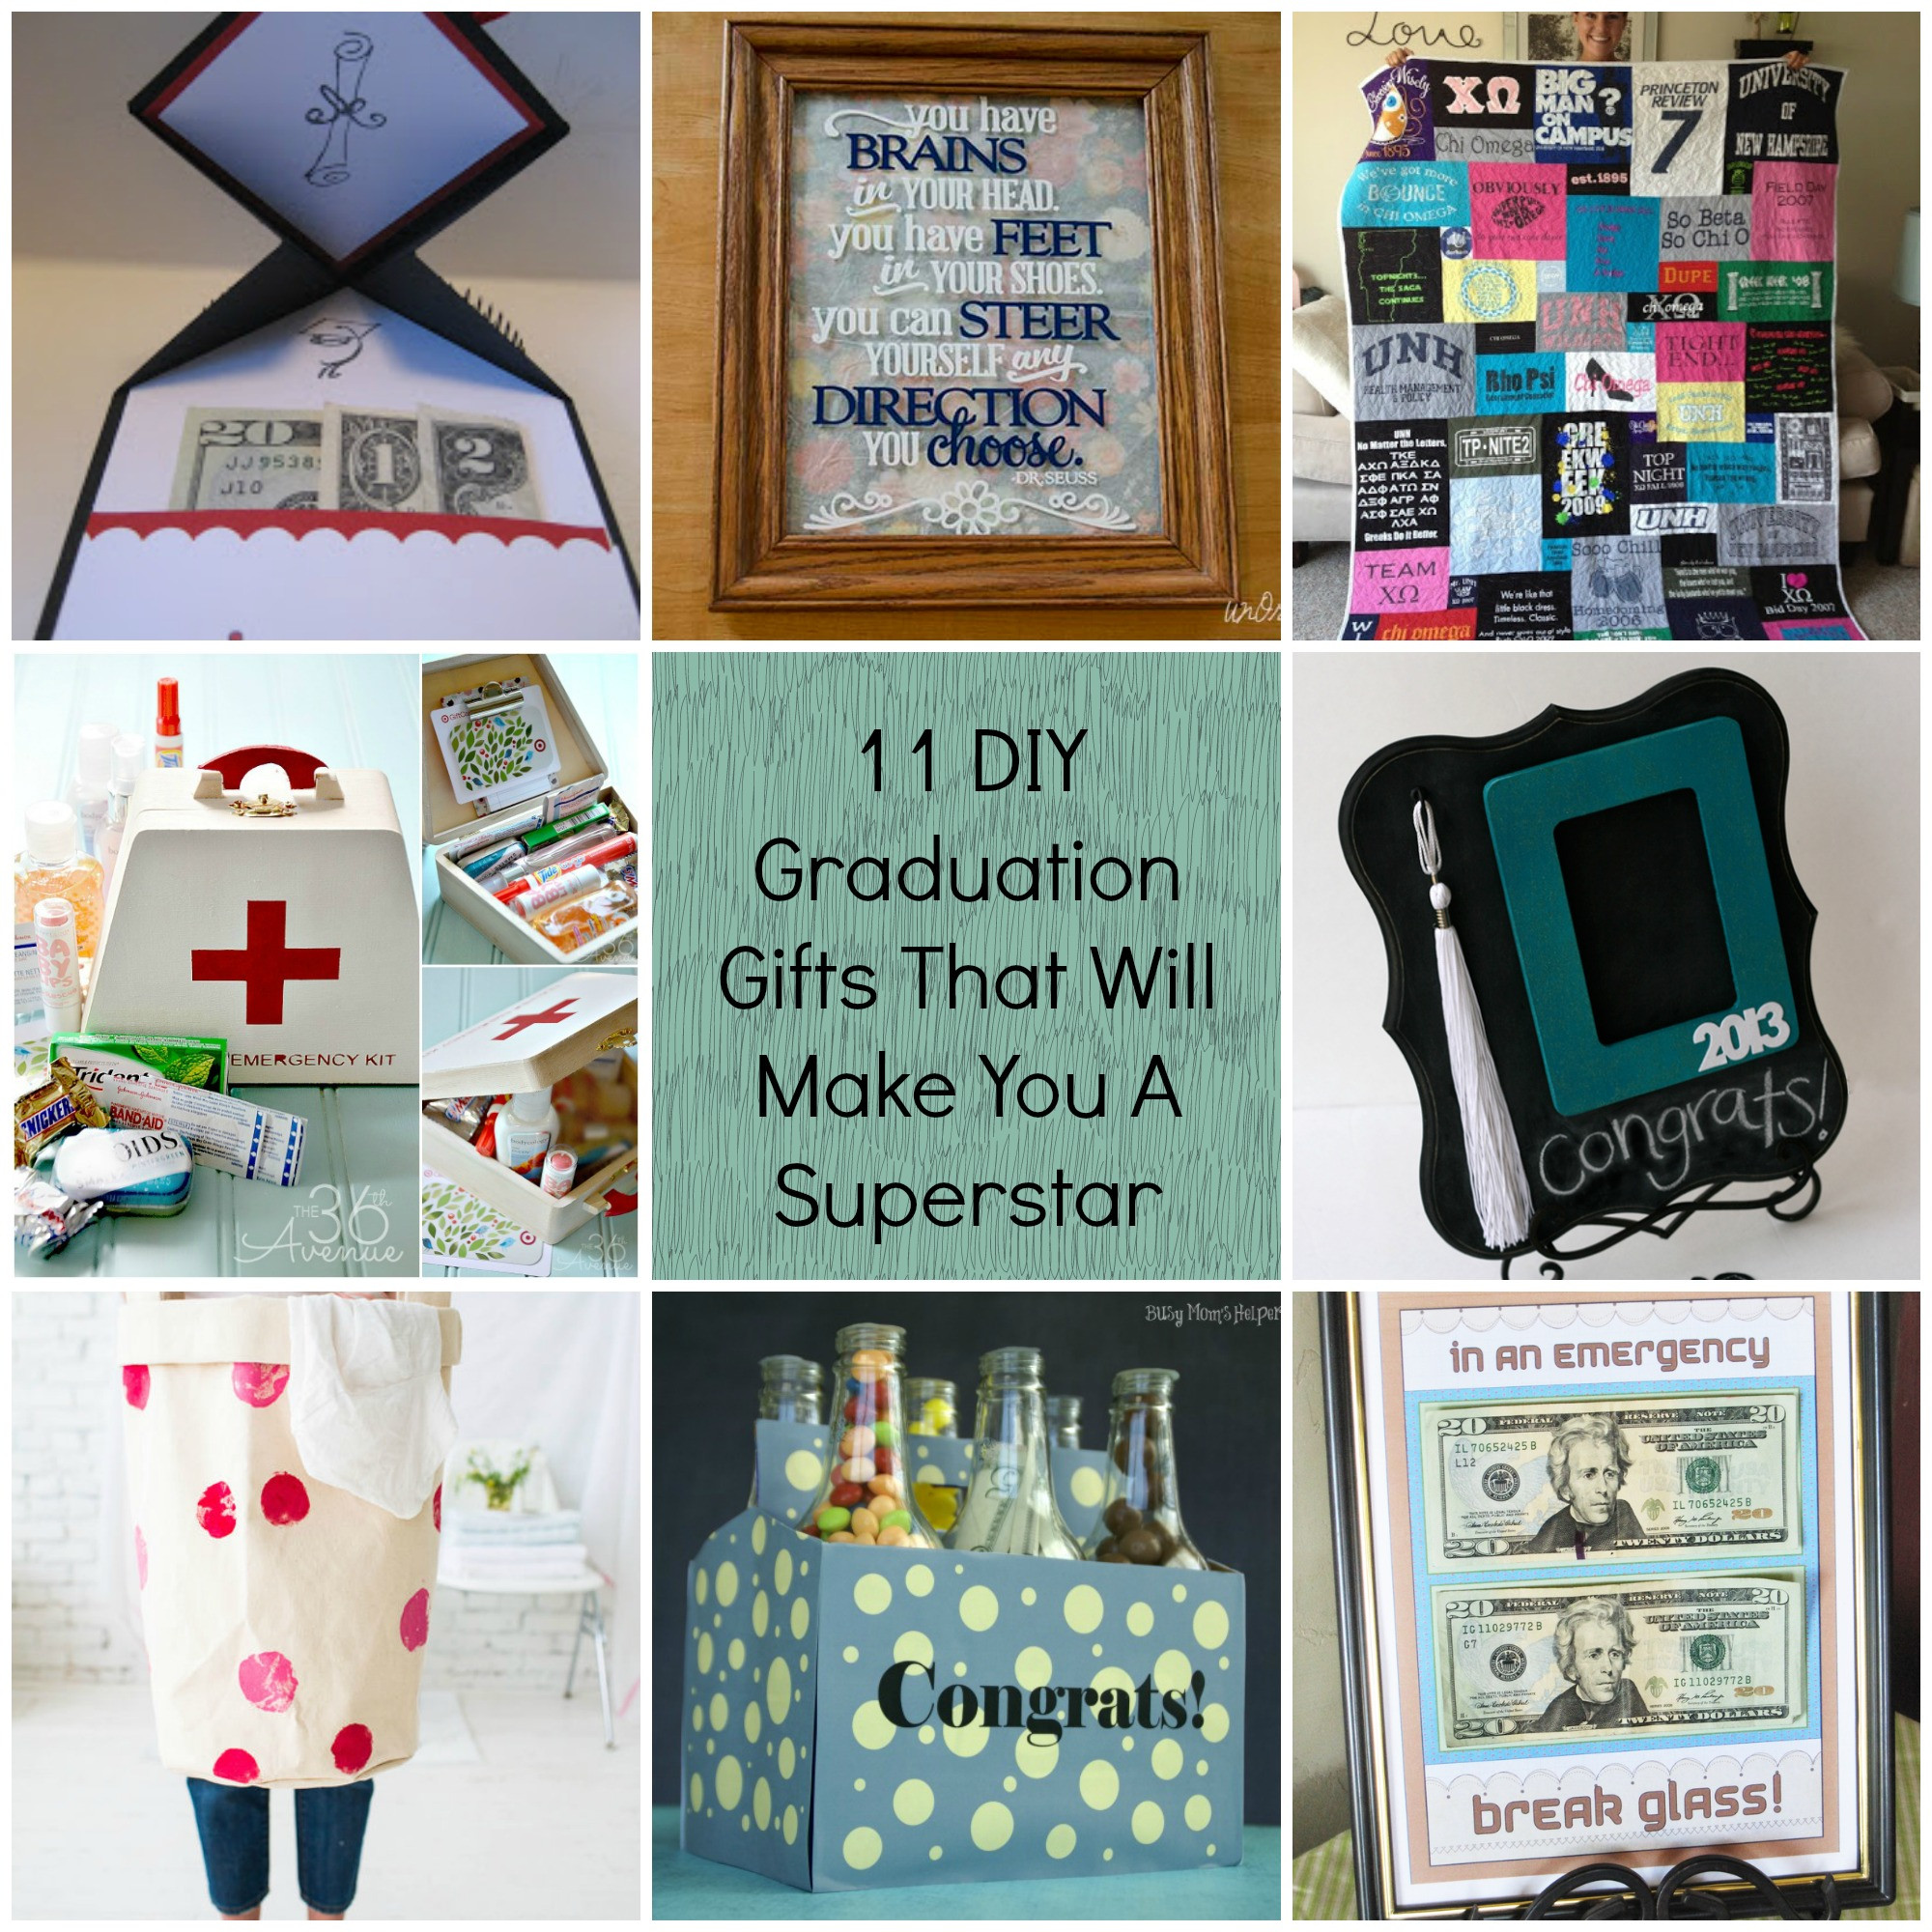 College Graduation Gift Ideas
 11 DIY Graduation Gifts That Will Make You A Superstar